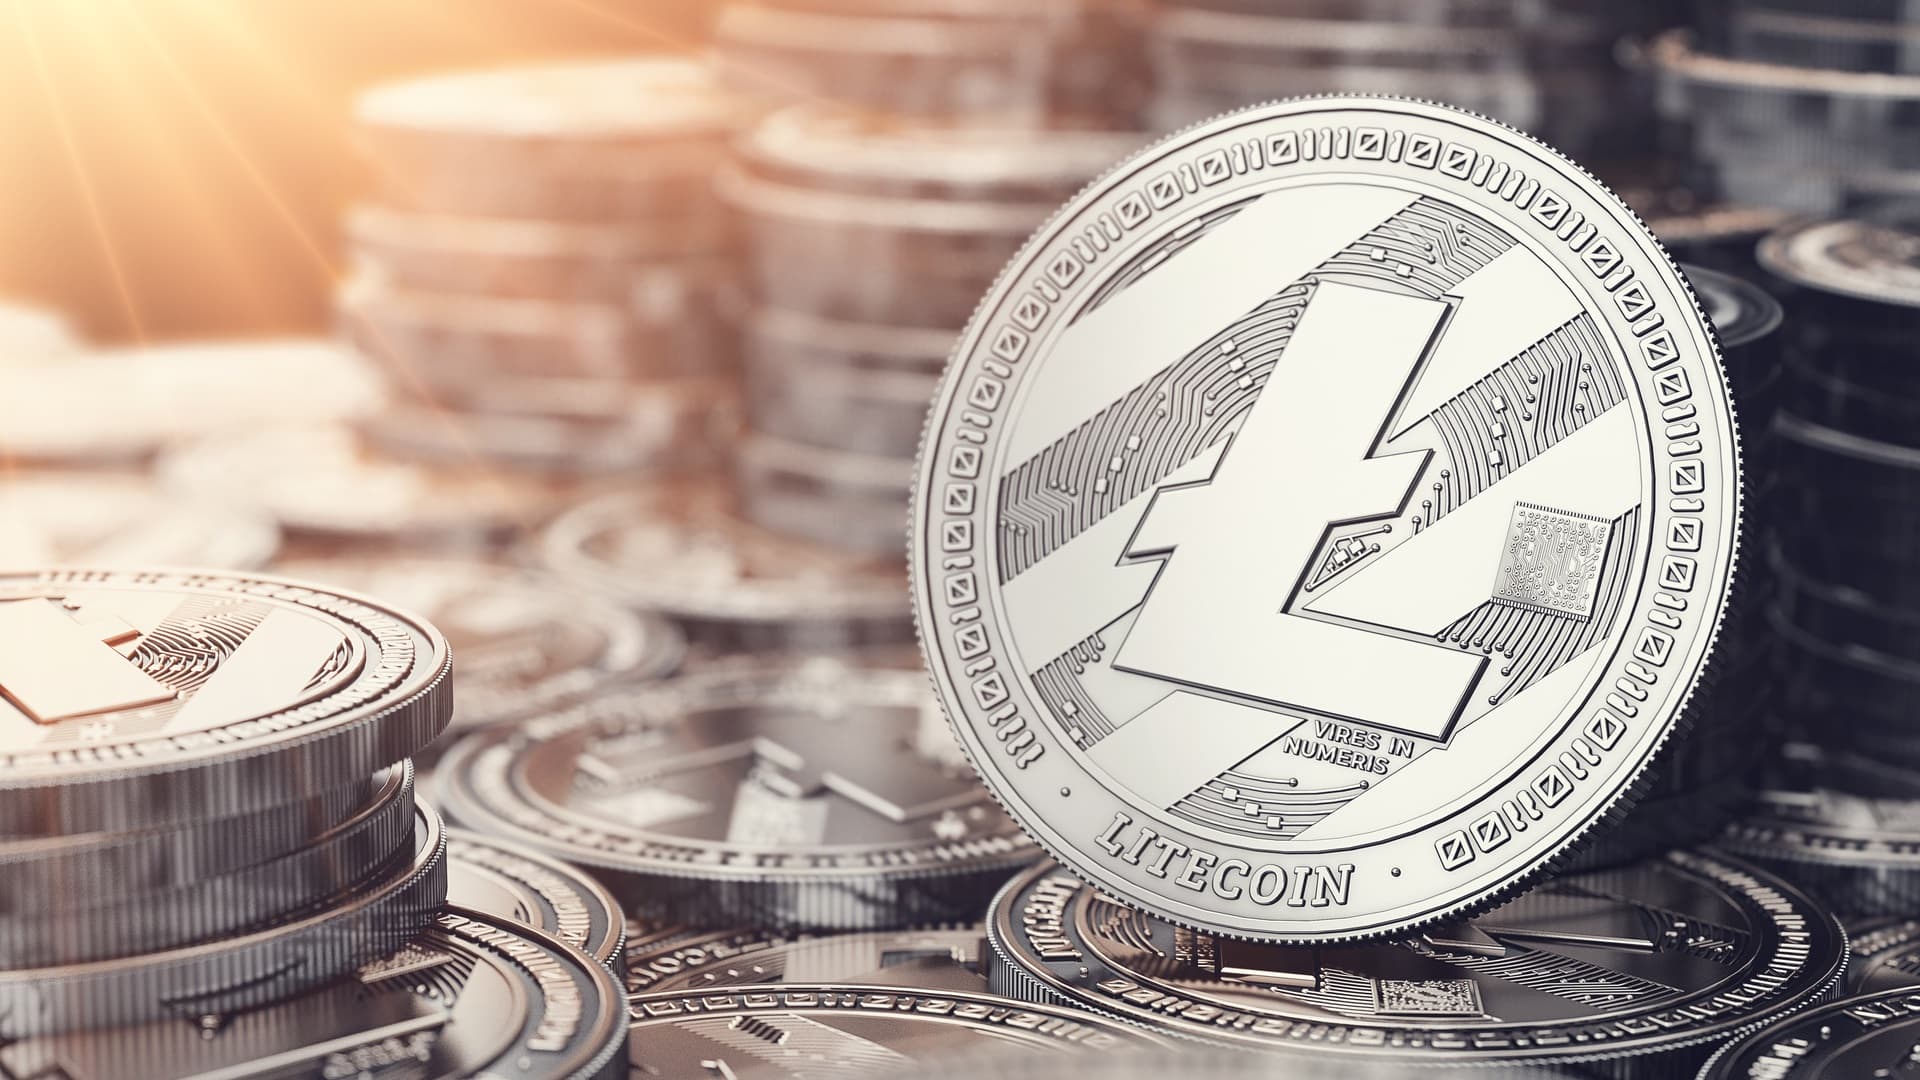 Picture of Litecoin coins stacked together. Newegg now accepts Litecoins through BitPay